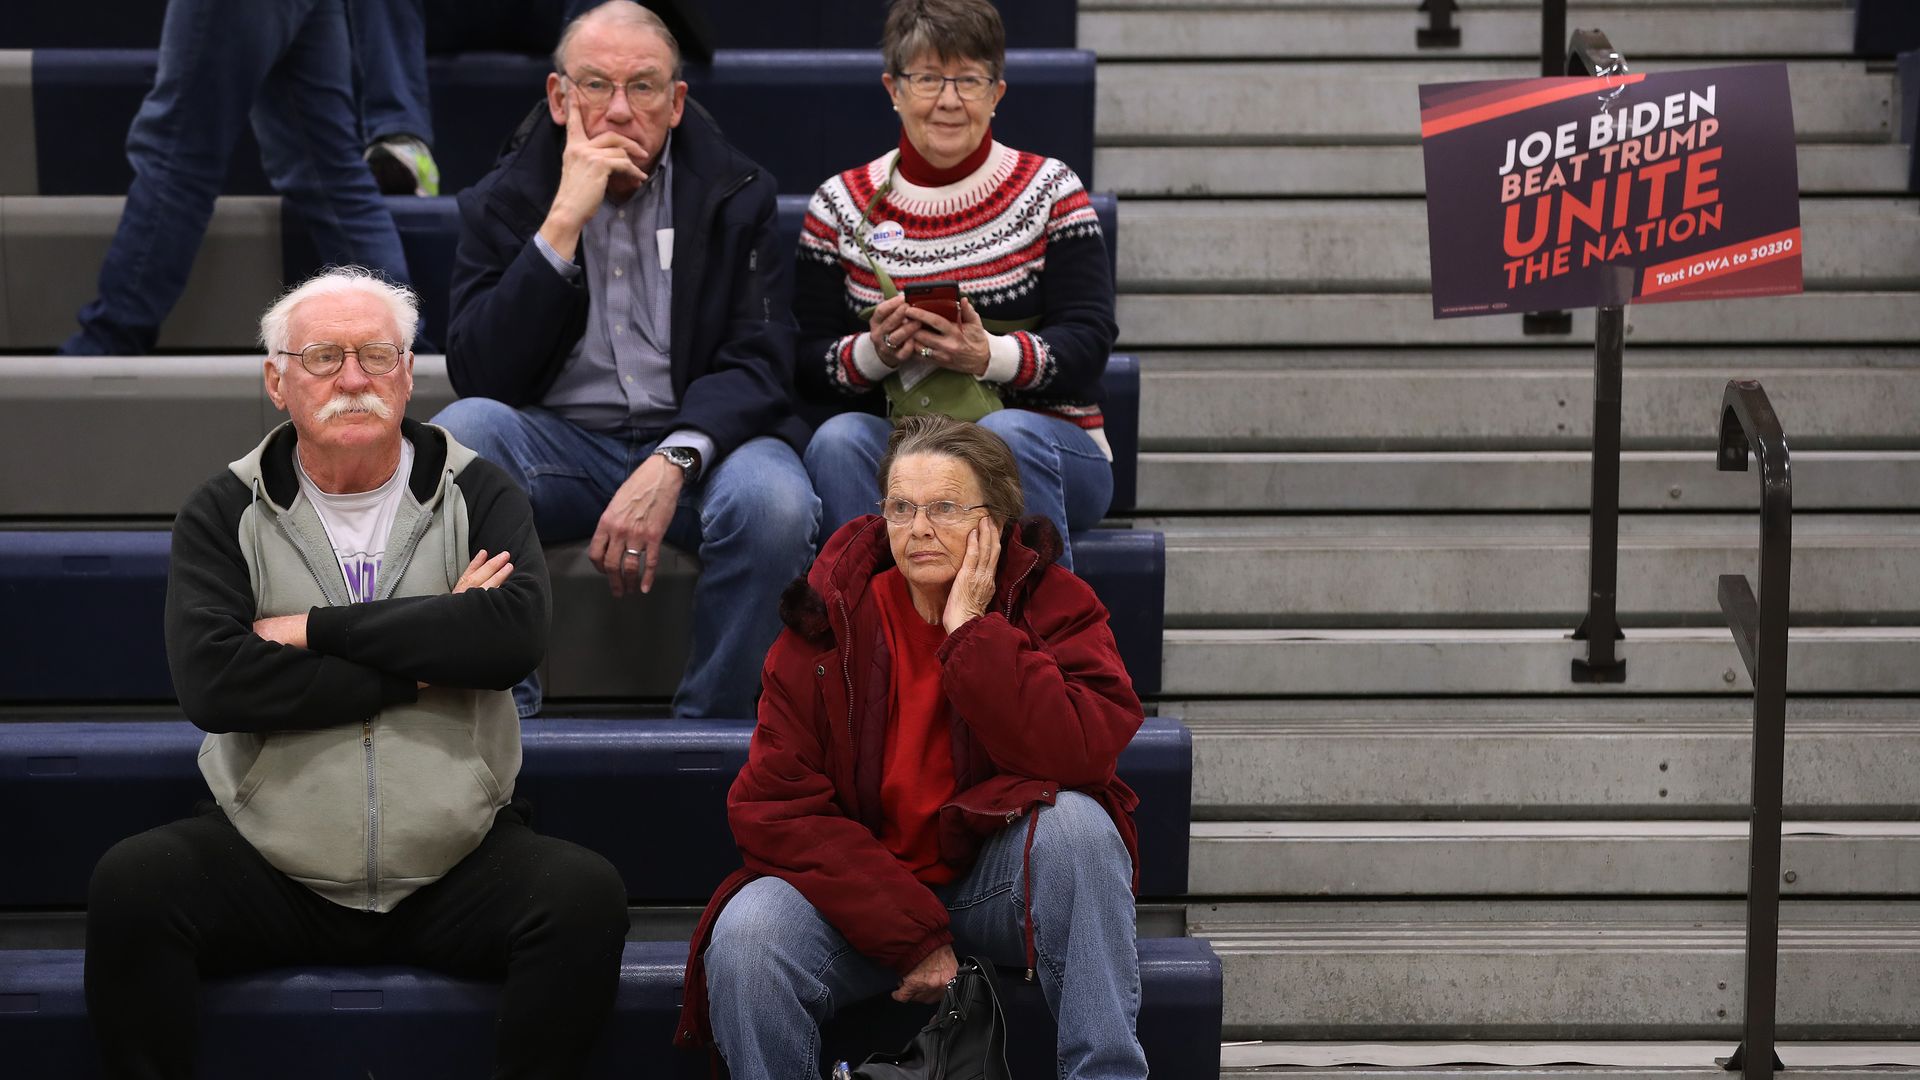 Photo of Biden supporters caucusing on bleachers in a Des Moines gym